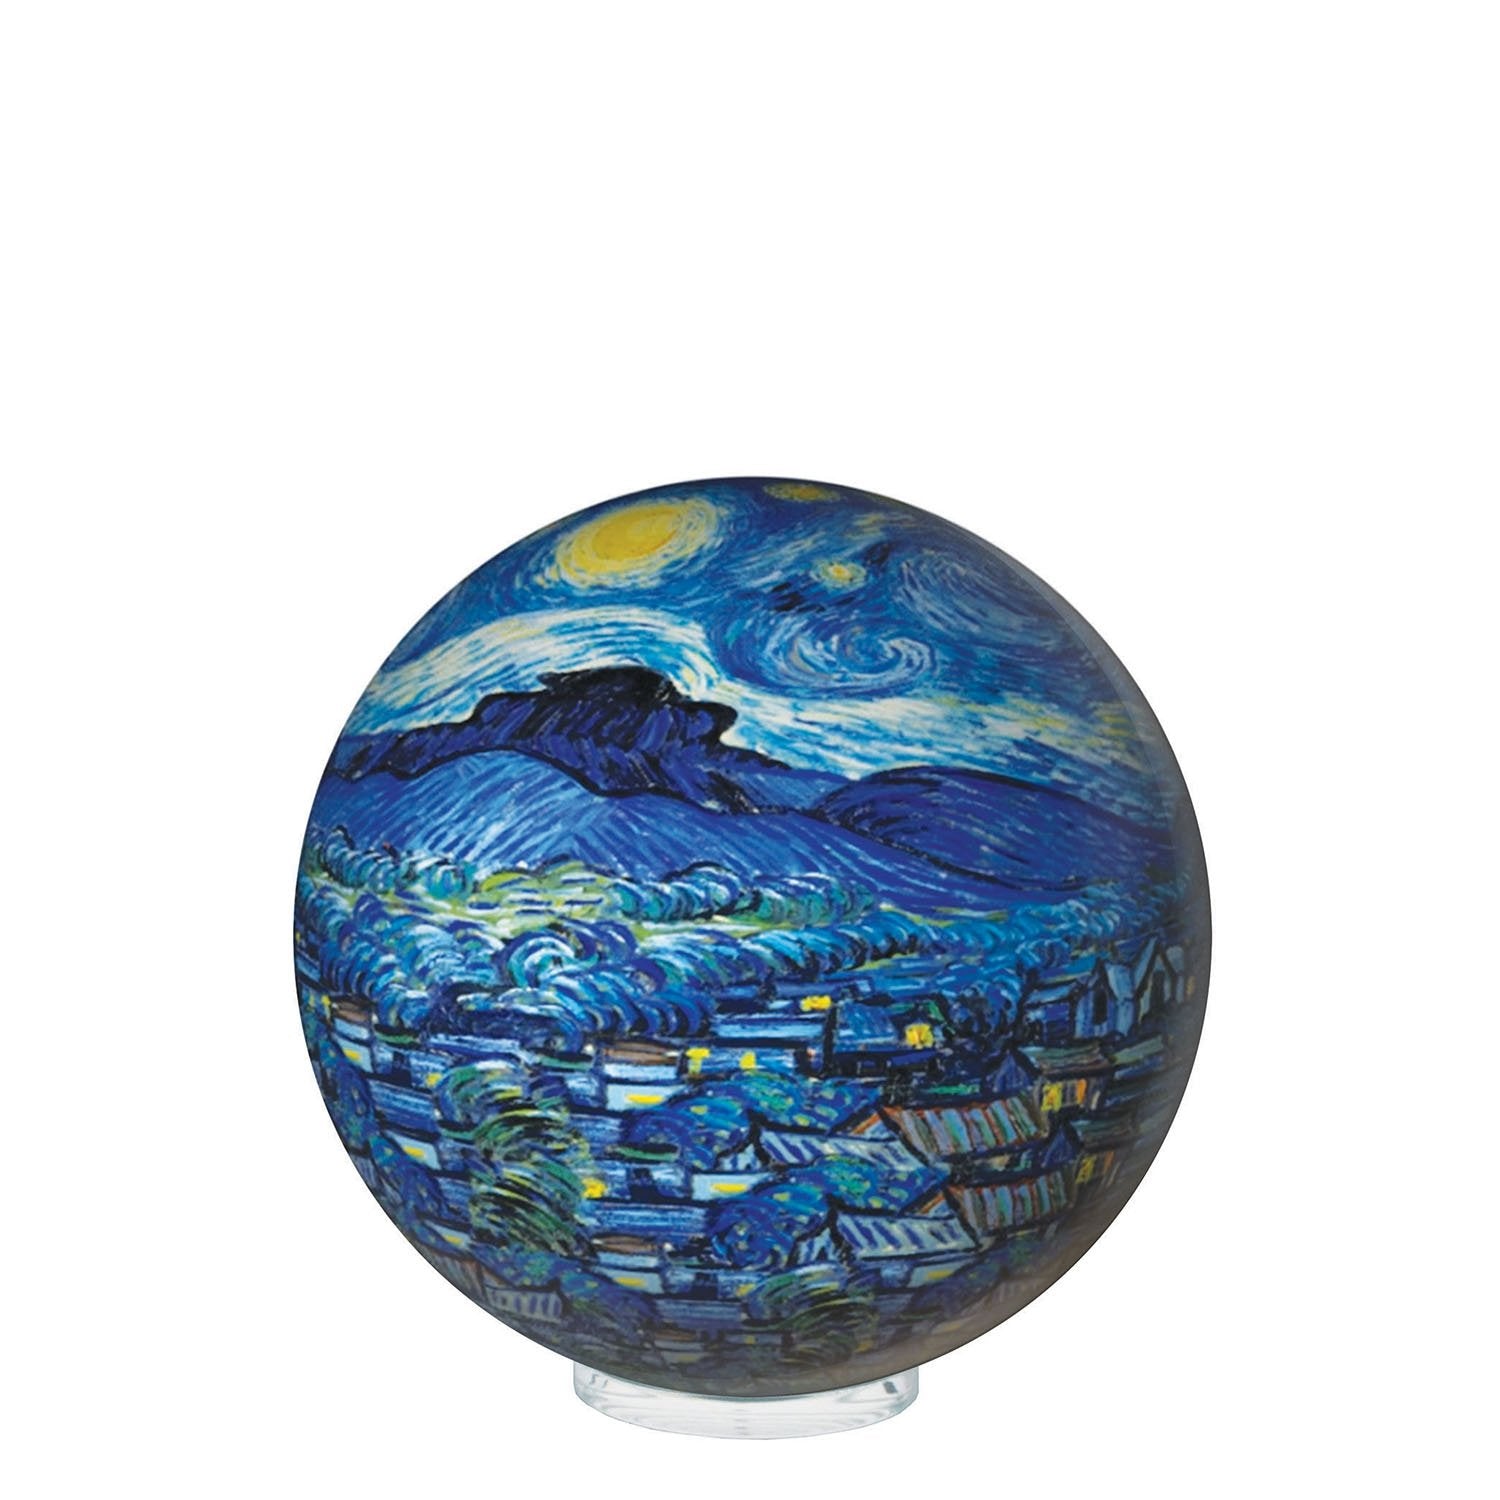 Innovative Rotating Globes  Solar Powered by Ambient Light